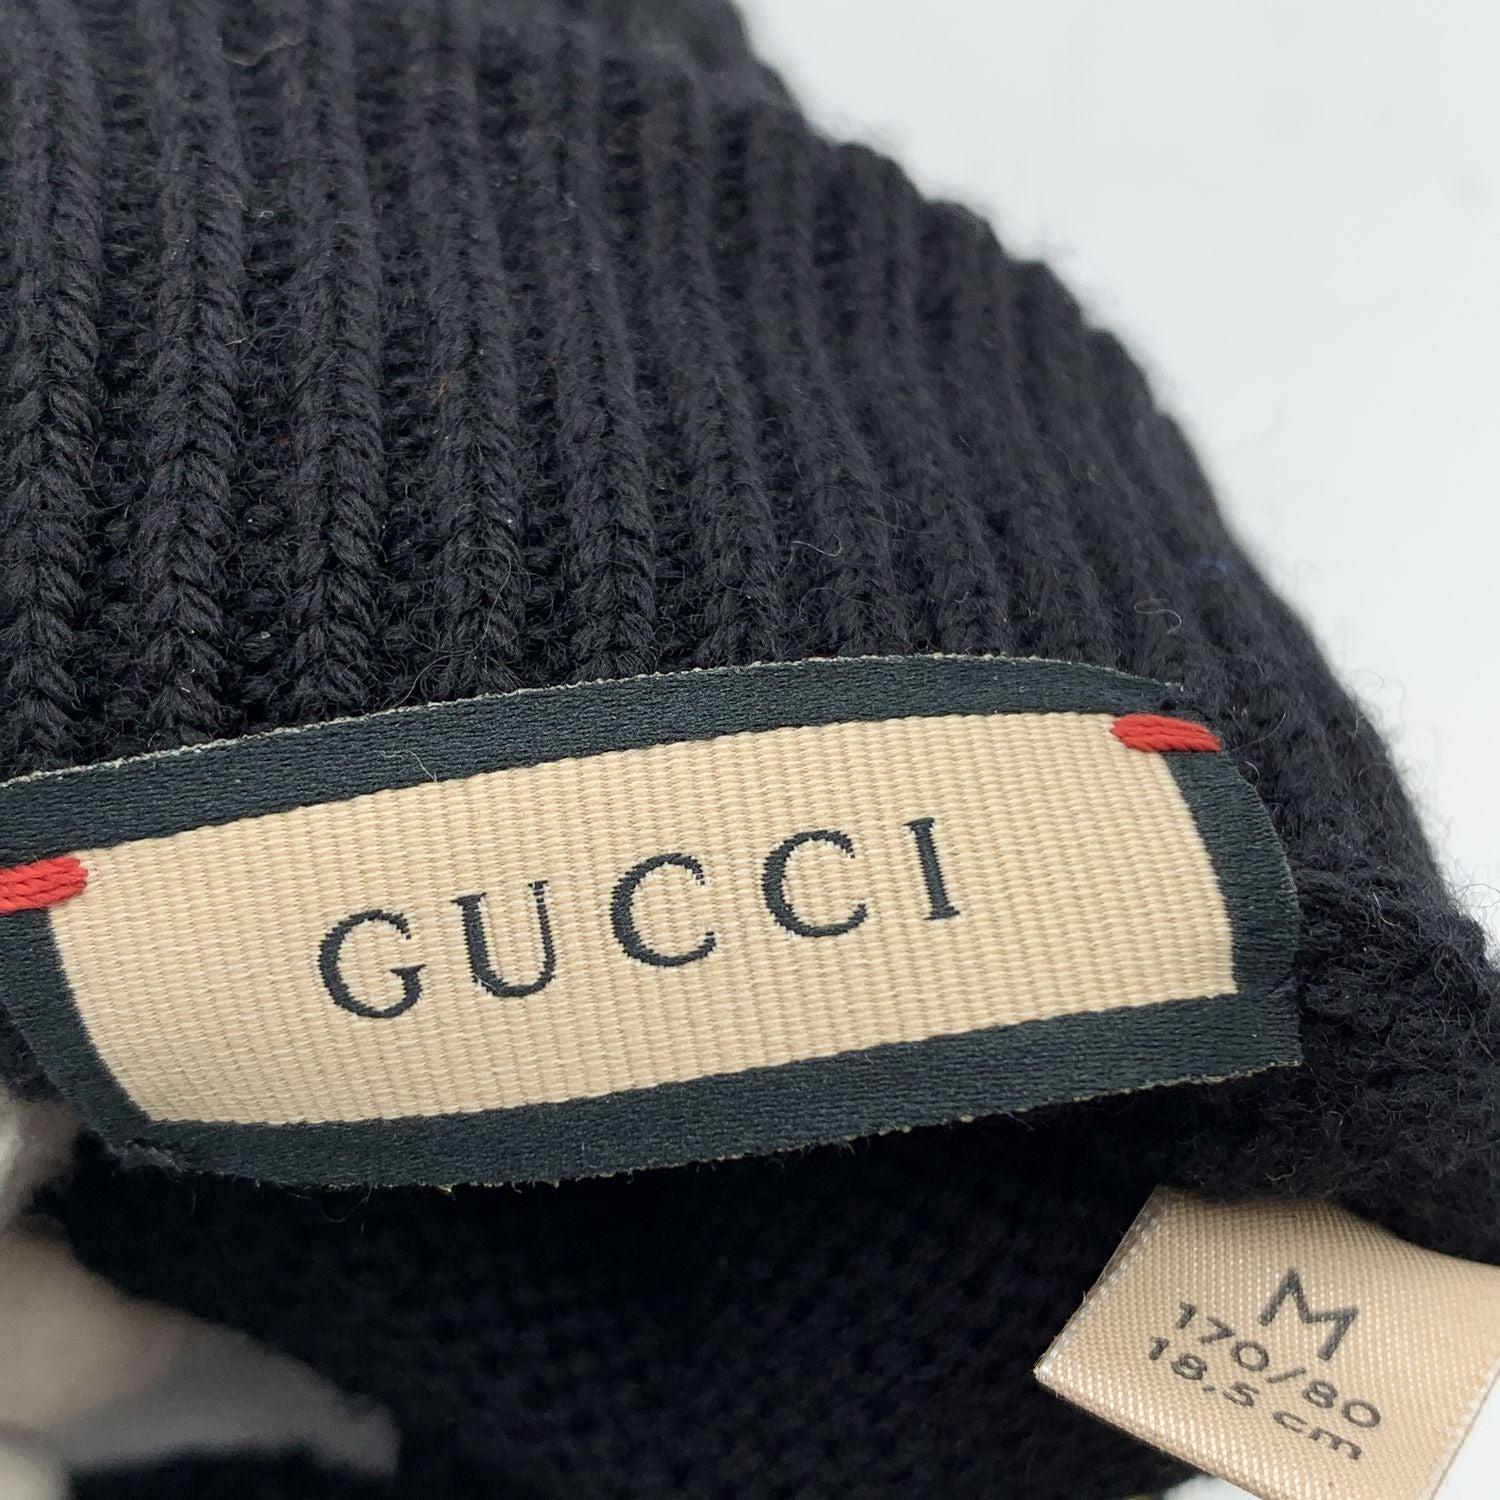 Gucci Black Wool and Leather Unisex Logo Knit Gloves Size M For Sale 1